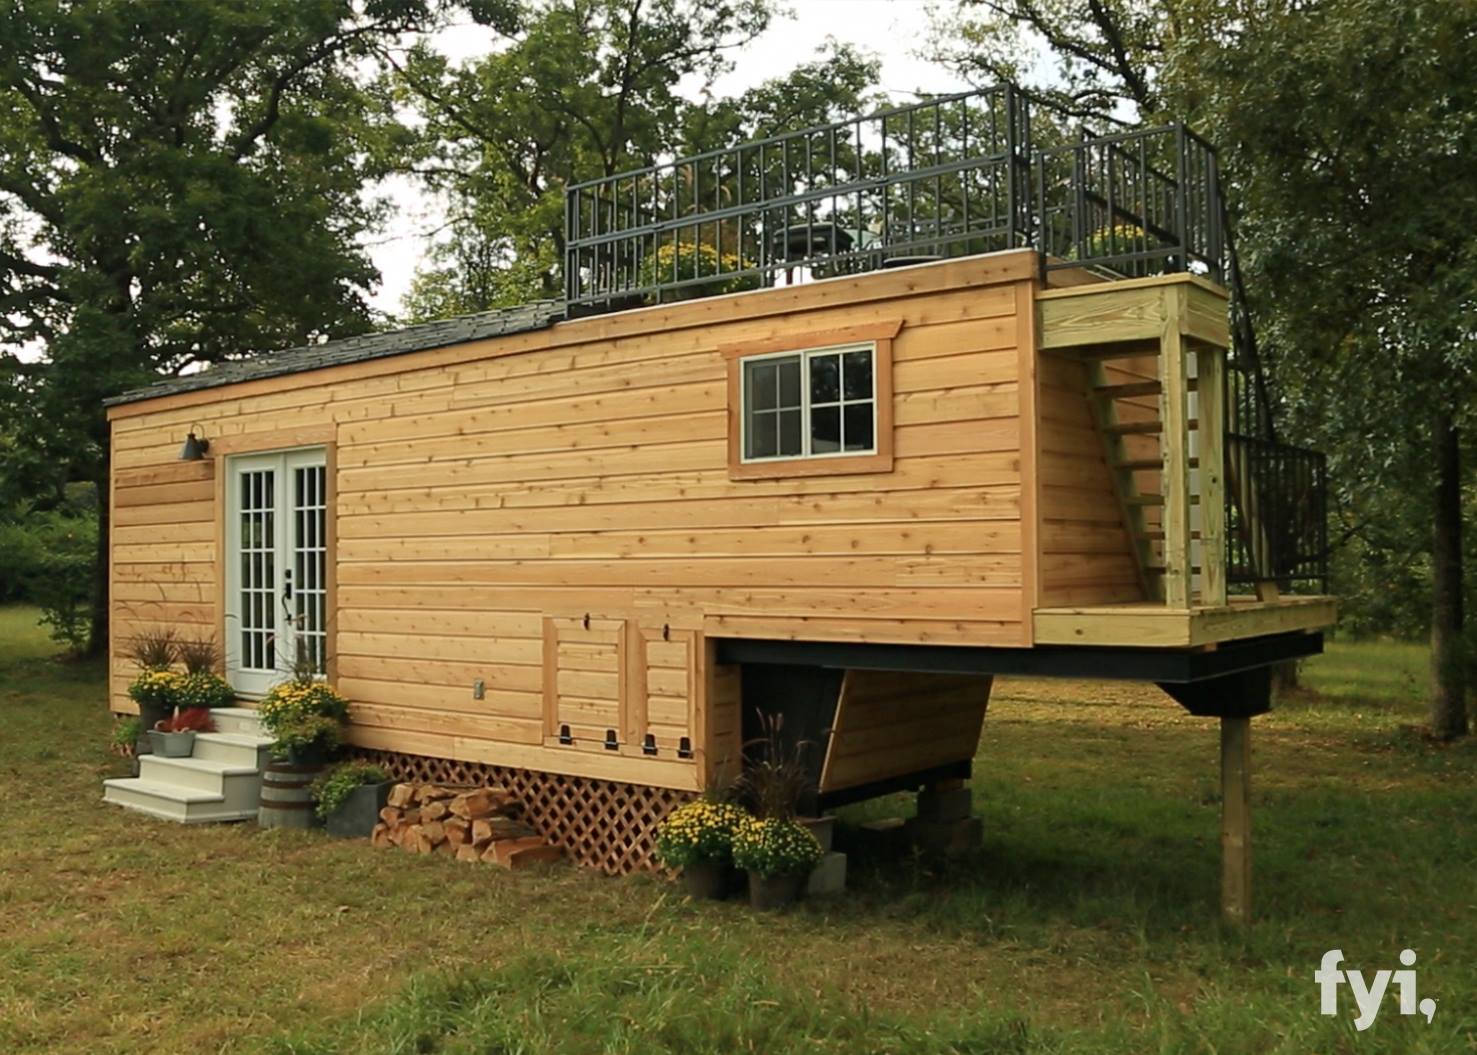 TINY HOUSE TOWN: The Honeymoon Suite Tiny House